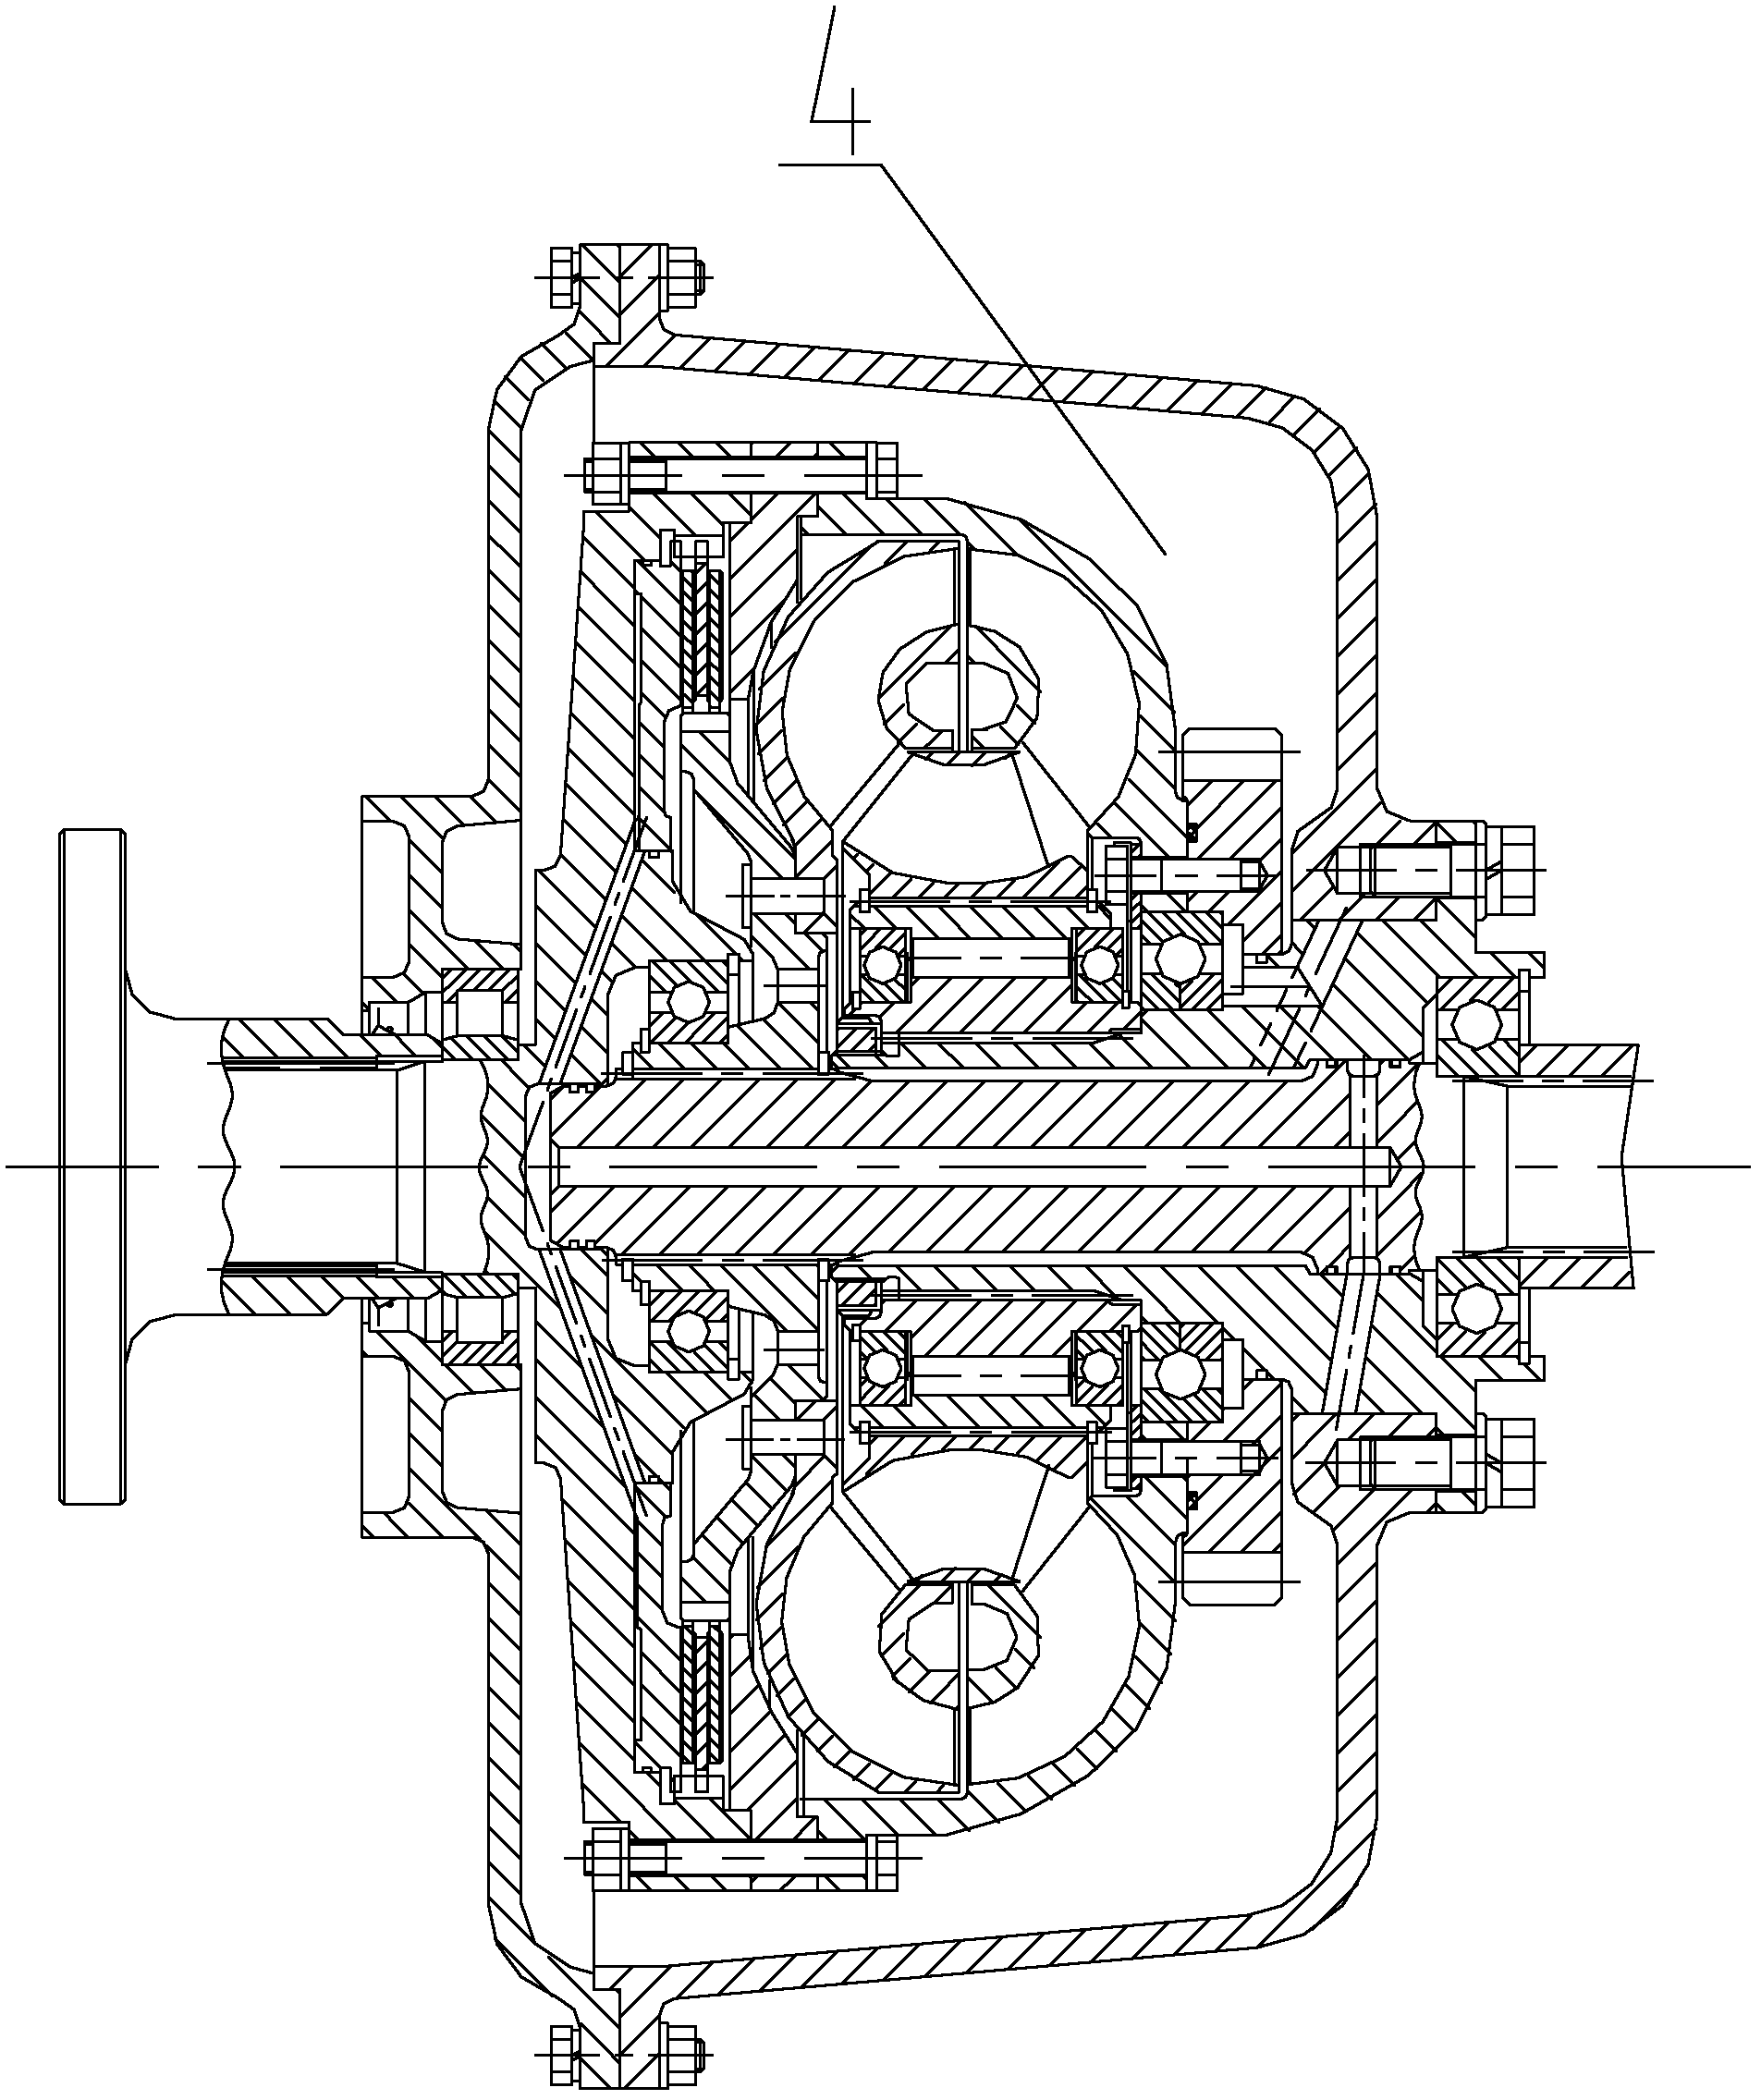 Hydraulic mechanical drive device for electric vehicle